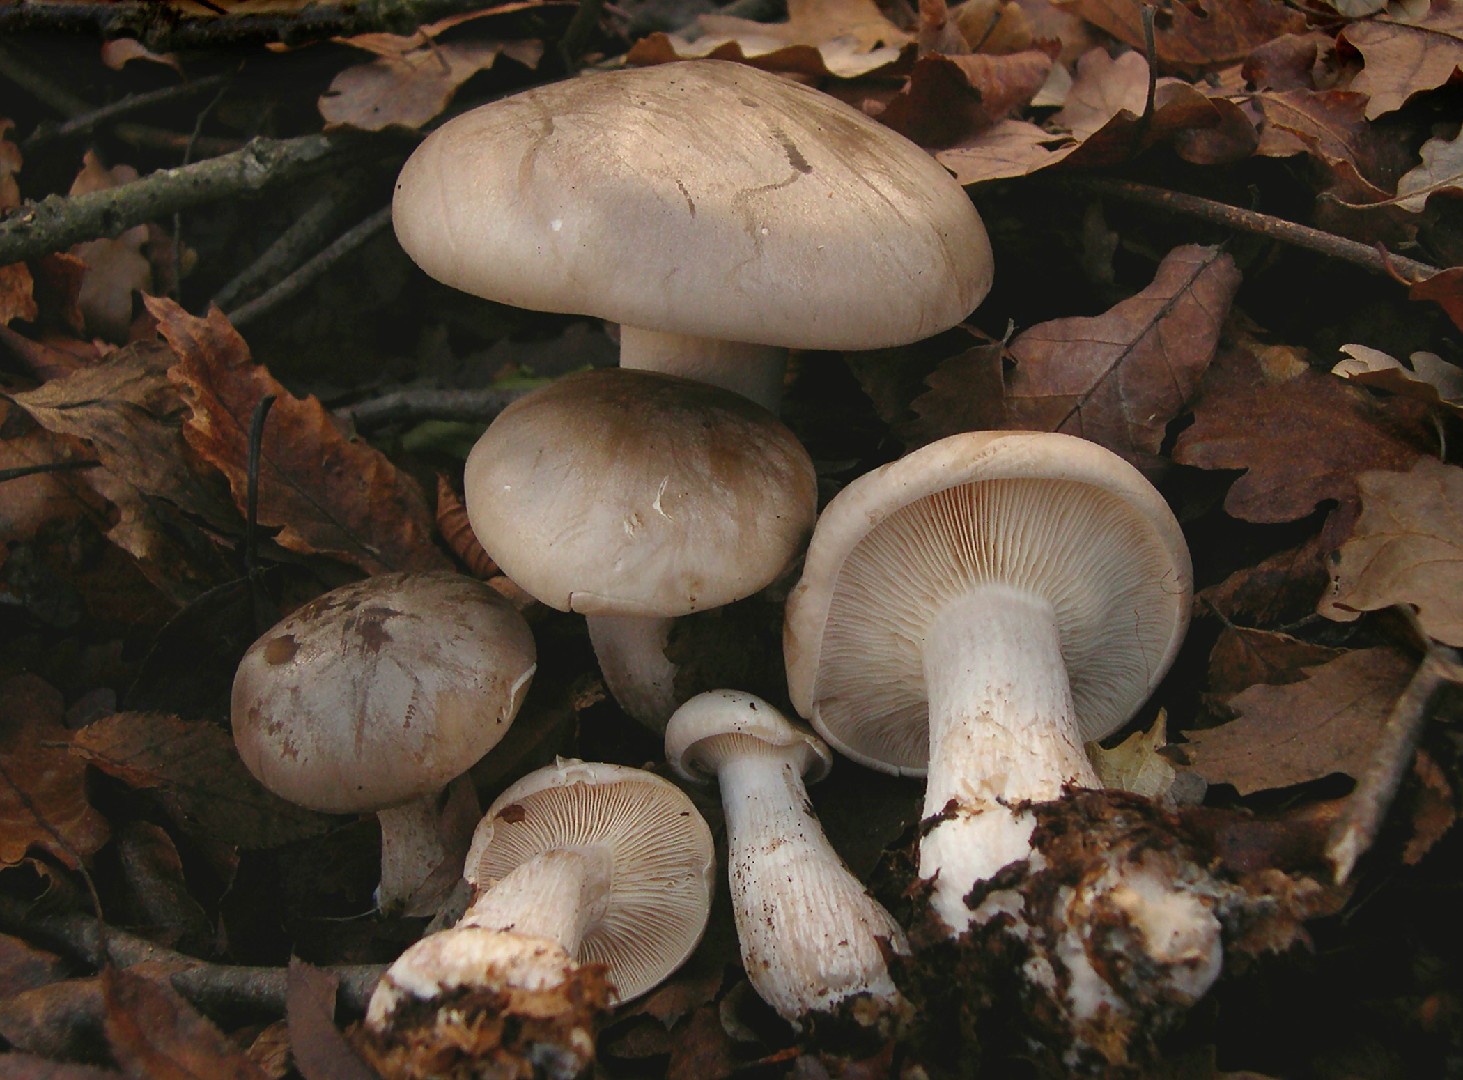 Clouded funnel (Clitocybe nebularis)